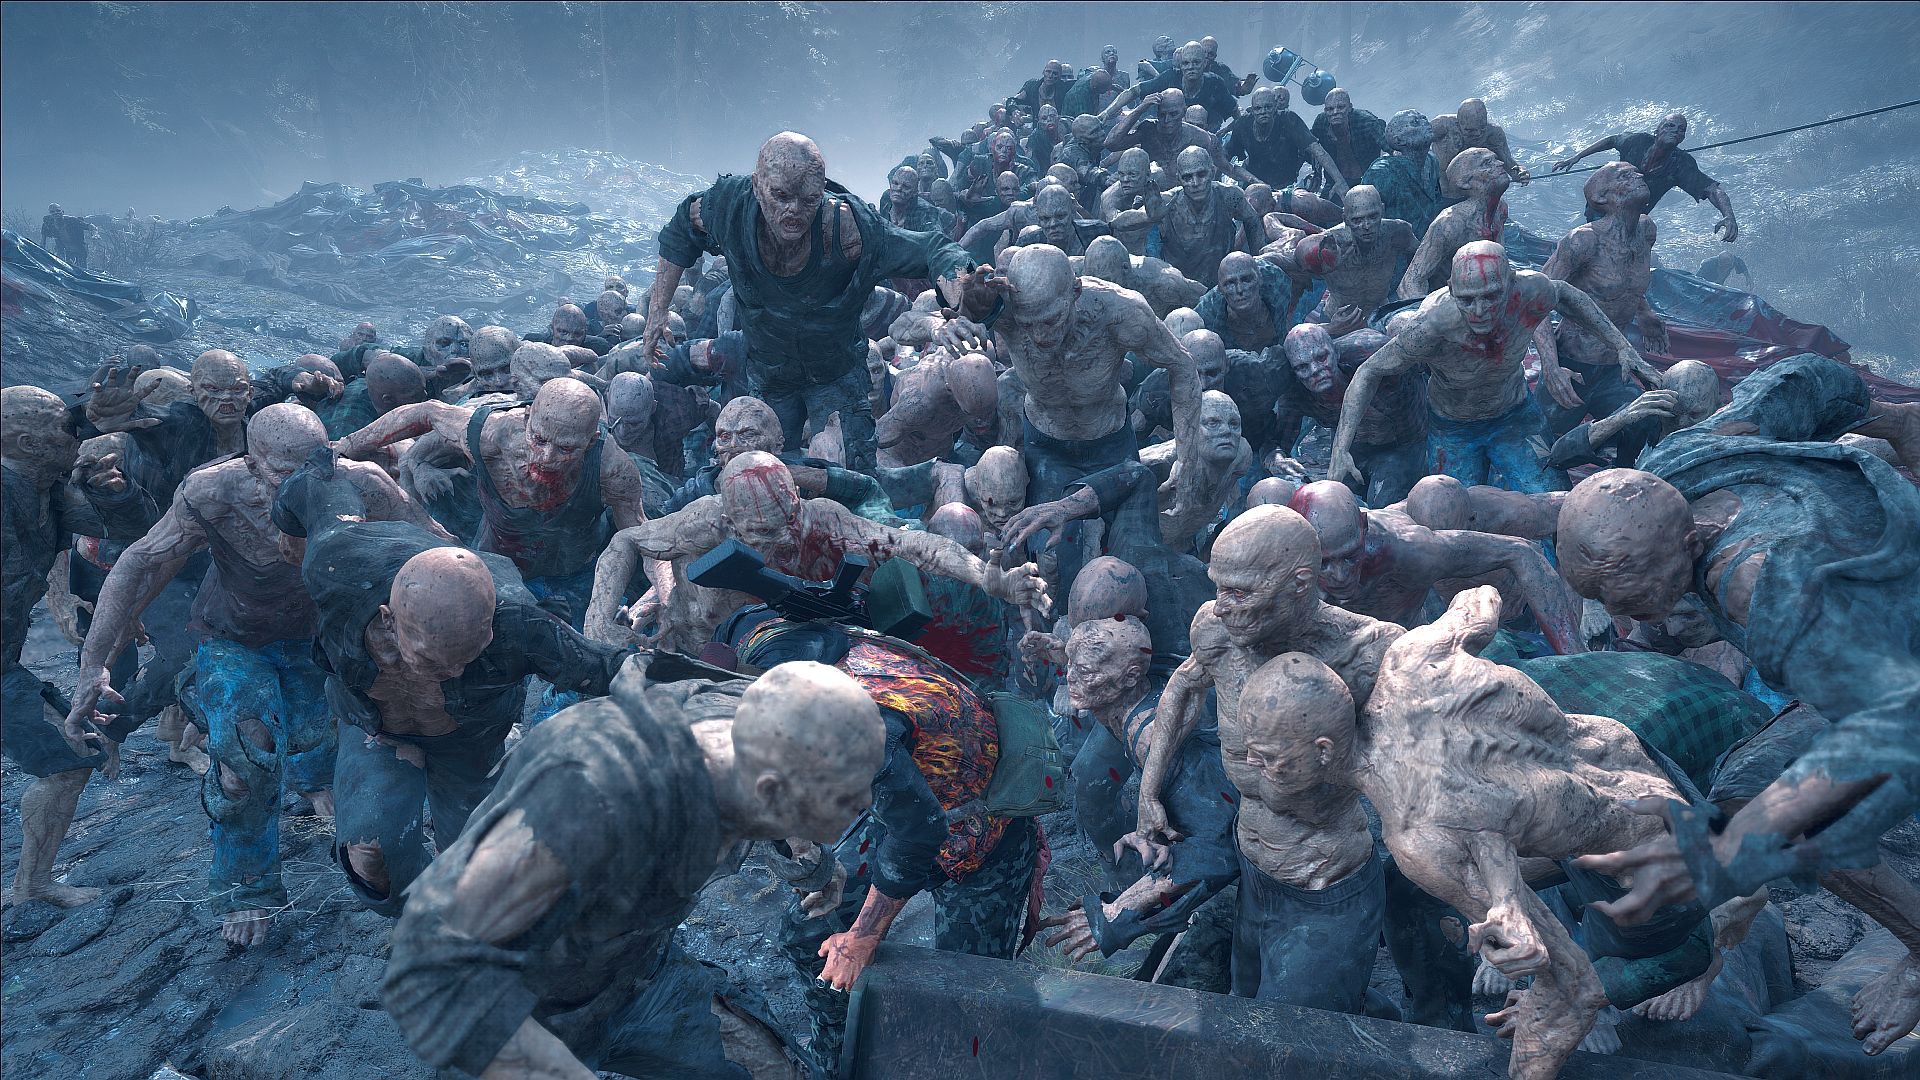 This Days Gone mod makes zombie hordes truly enormous